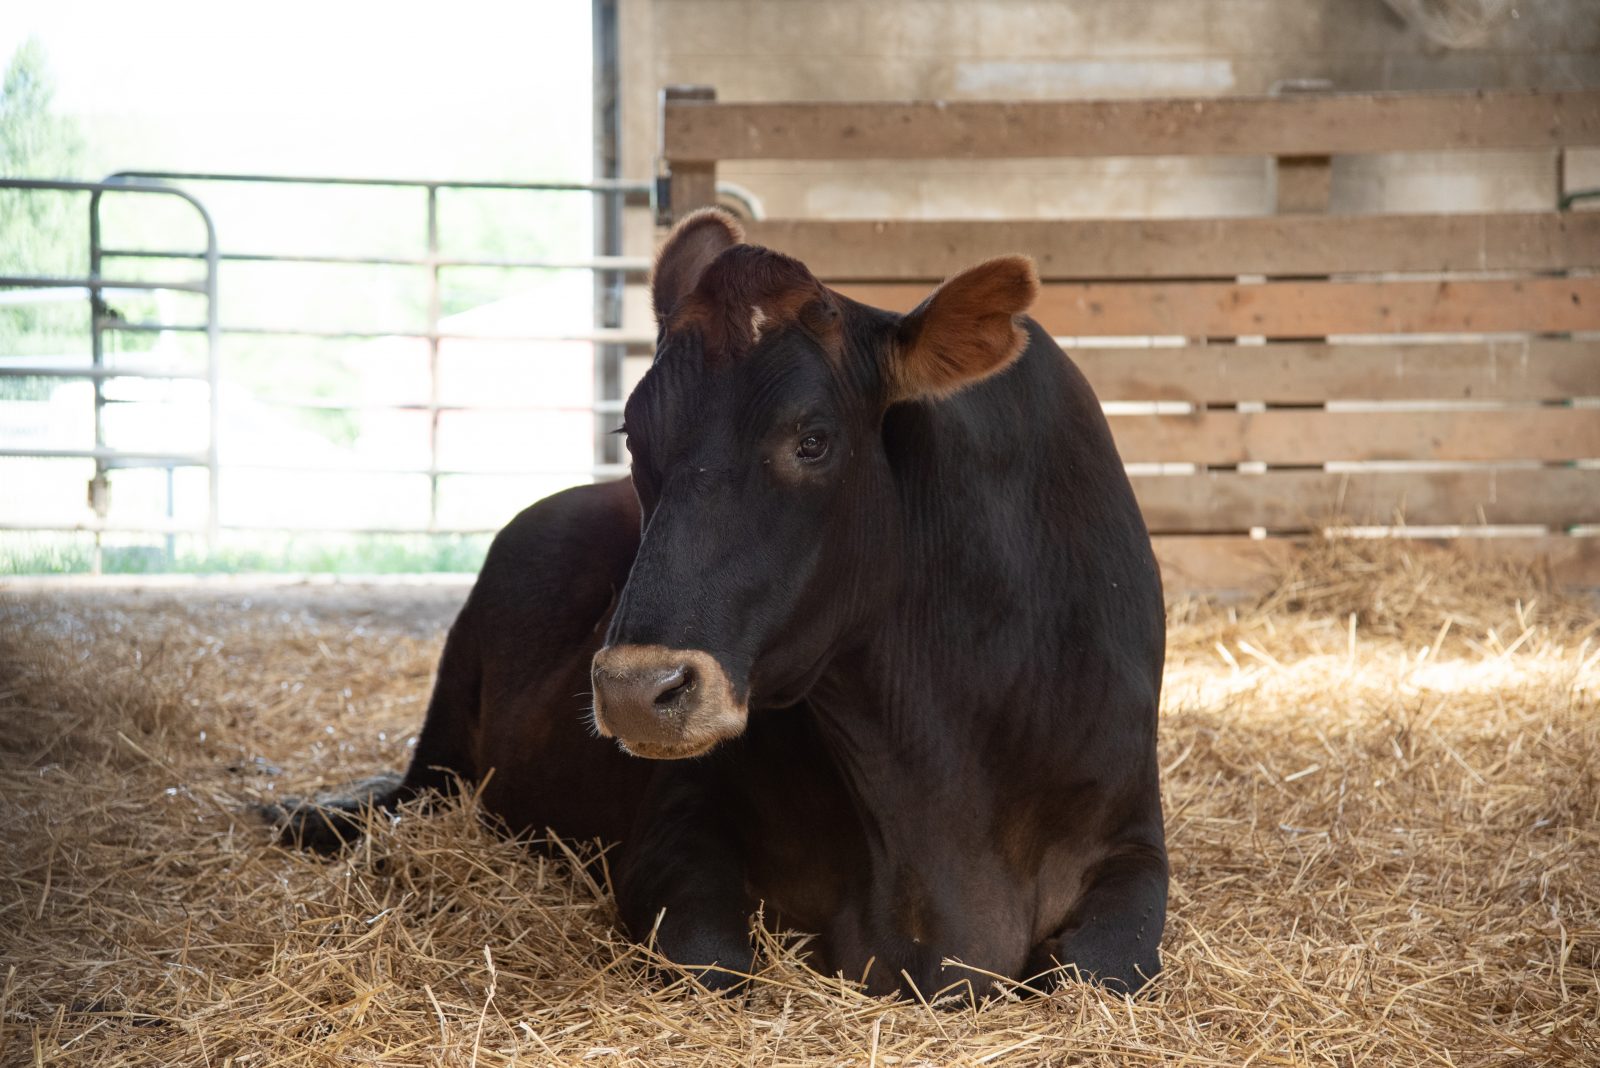 Norman steer relaxes in a barn at Farm Sanctuary